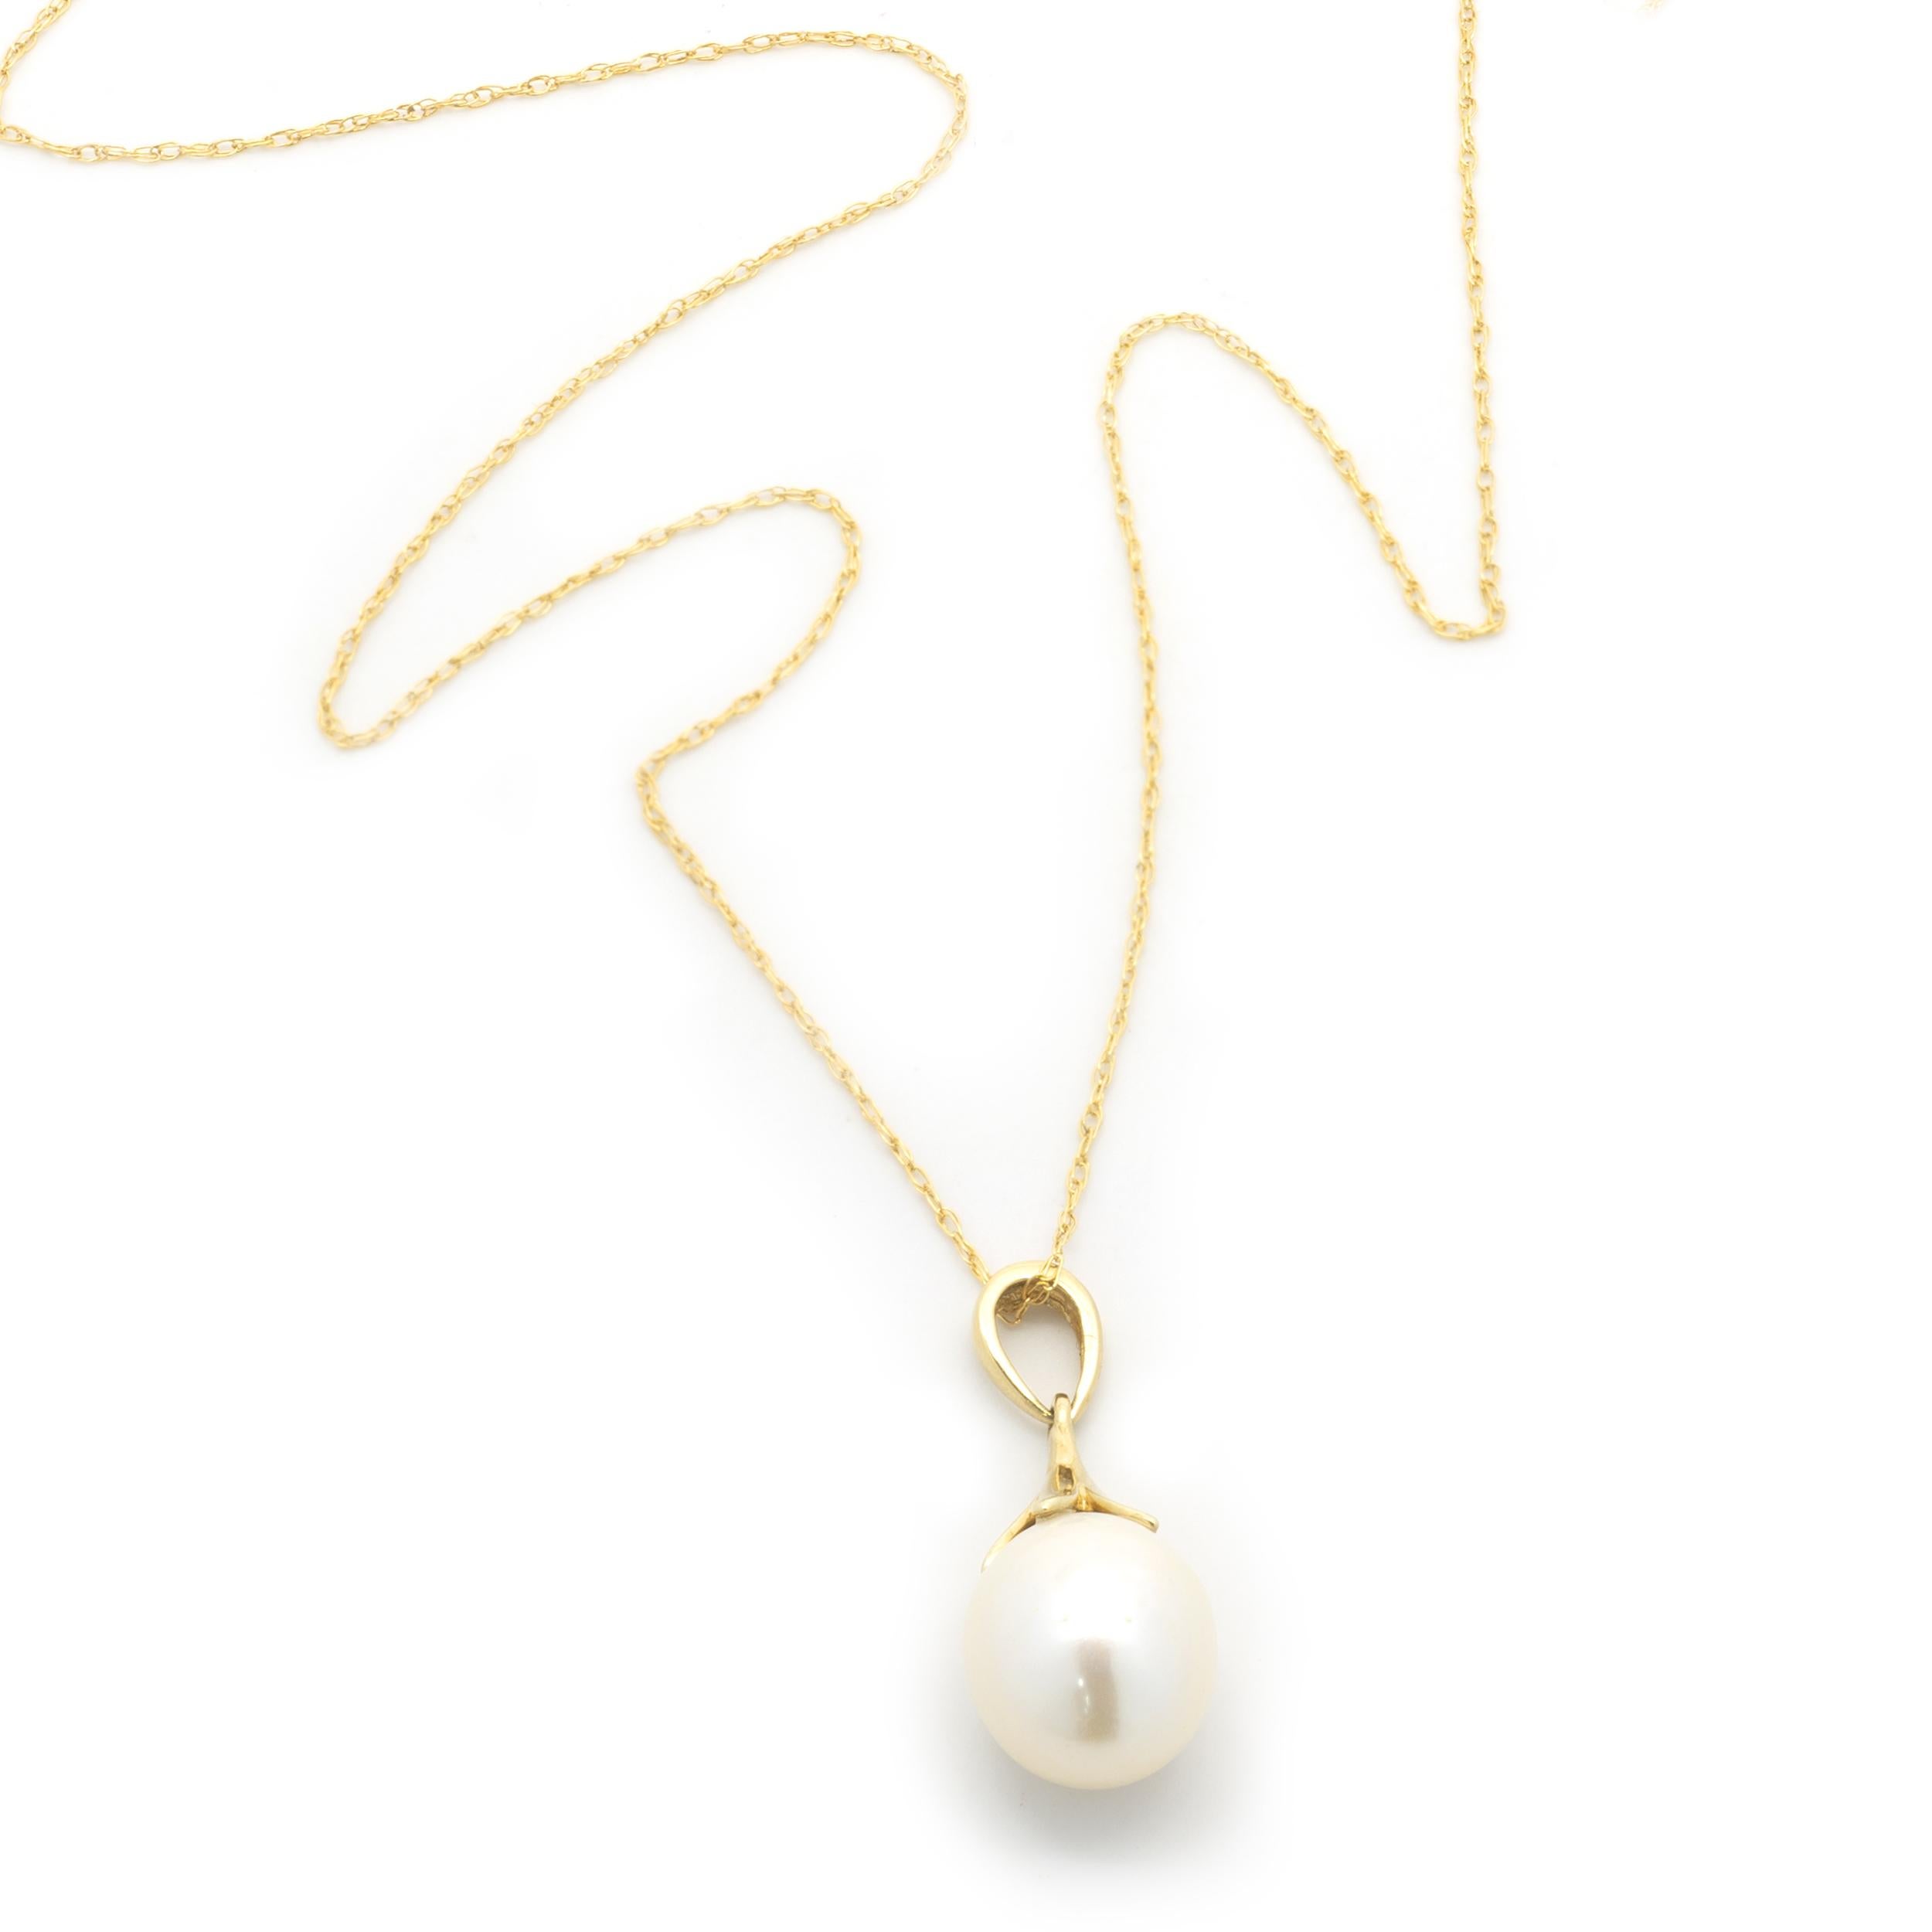 Round Cut 14 Karat Yellow Gold Cultured Pearl Necklace